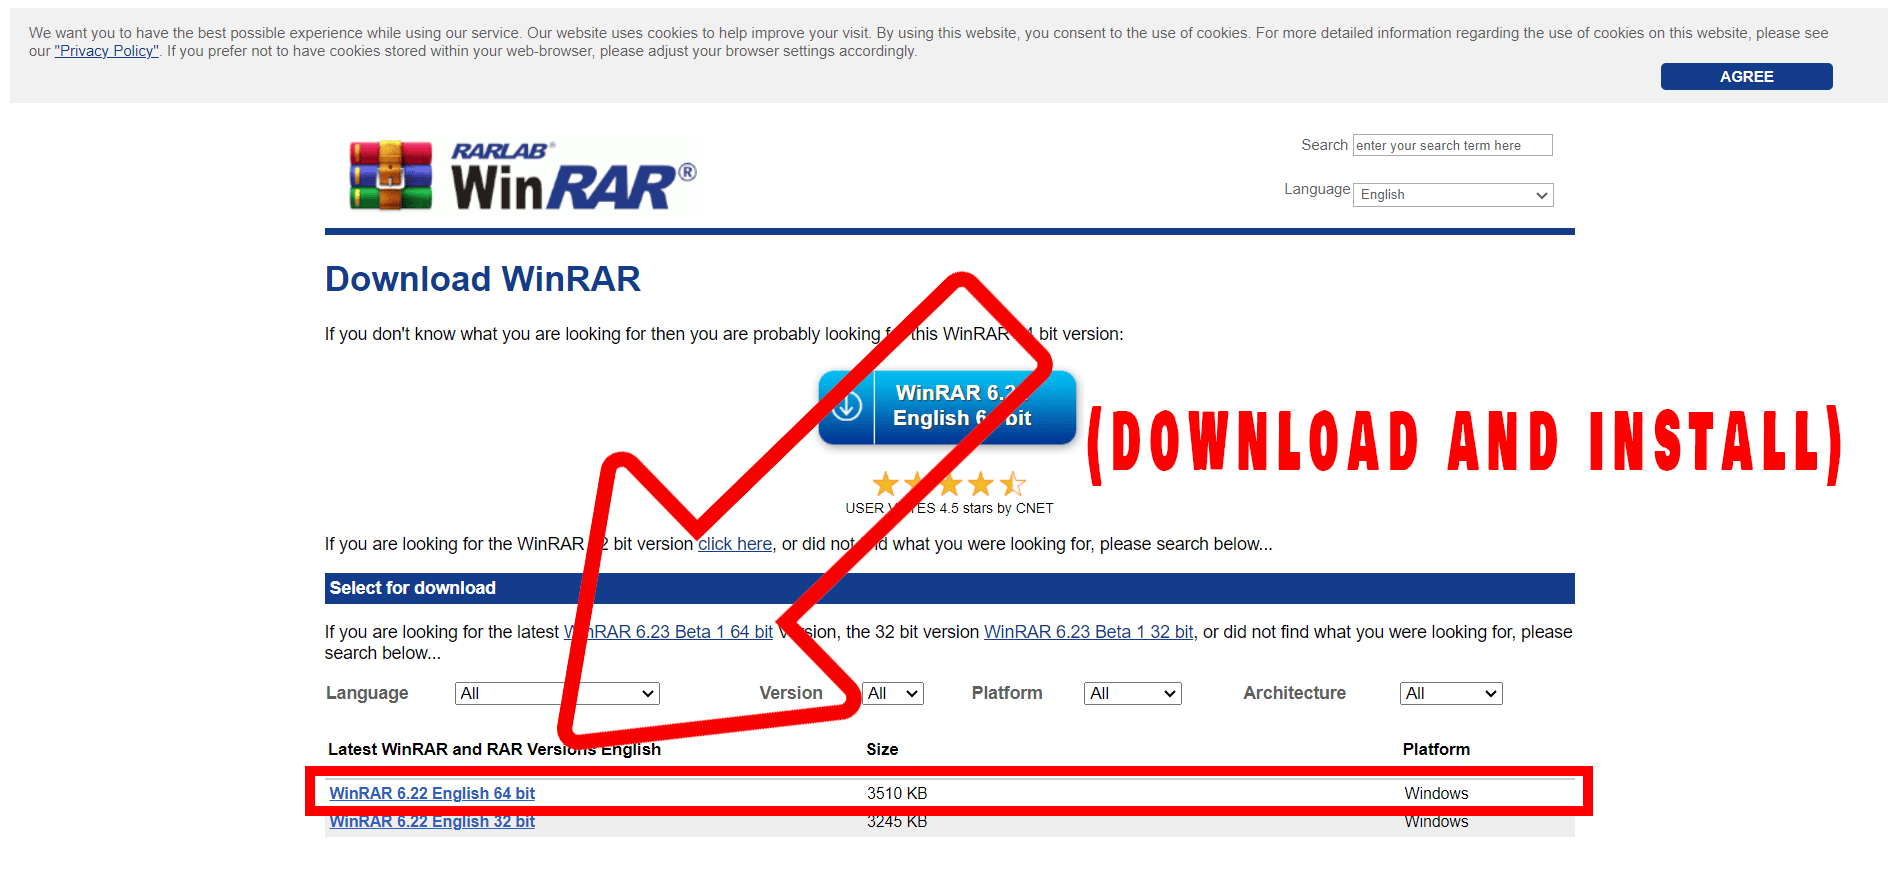 Method 3: How To Open a Password Protected ZIP File Using WinRAR: Step 1